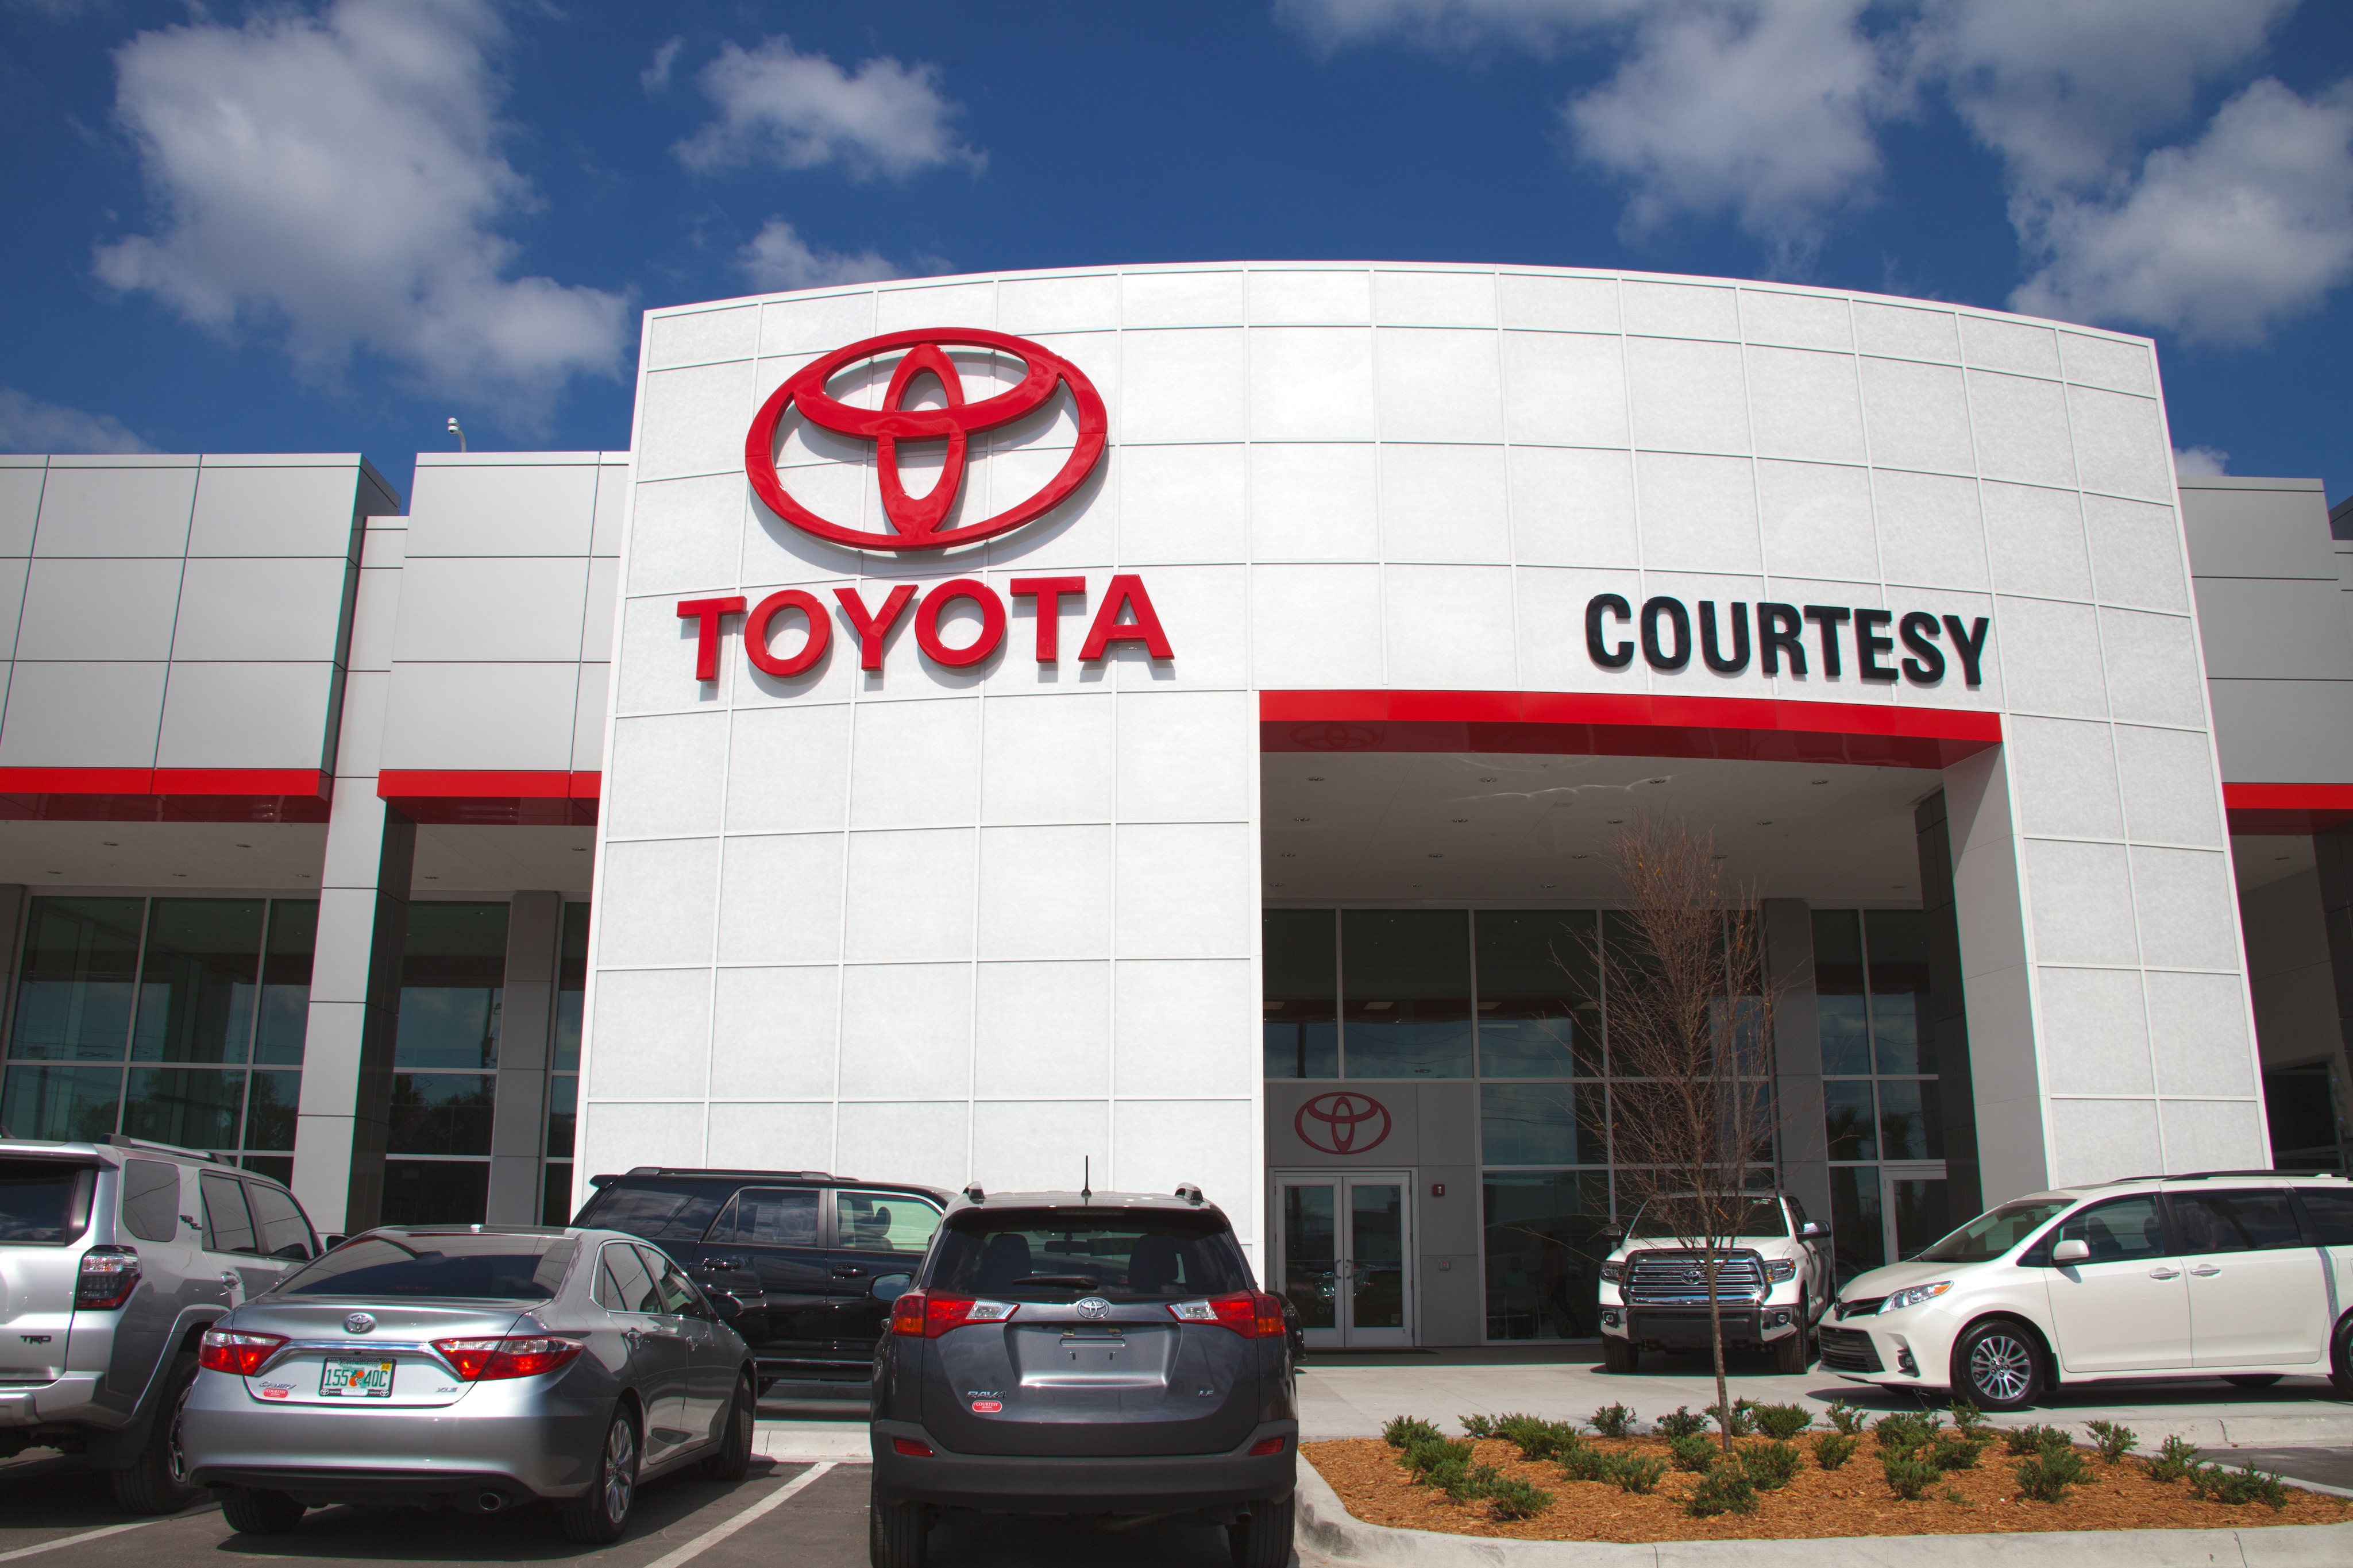 Find Toyota Dealers Near Me in Tampa Bay FL | Toyota Directions & Hours